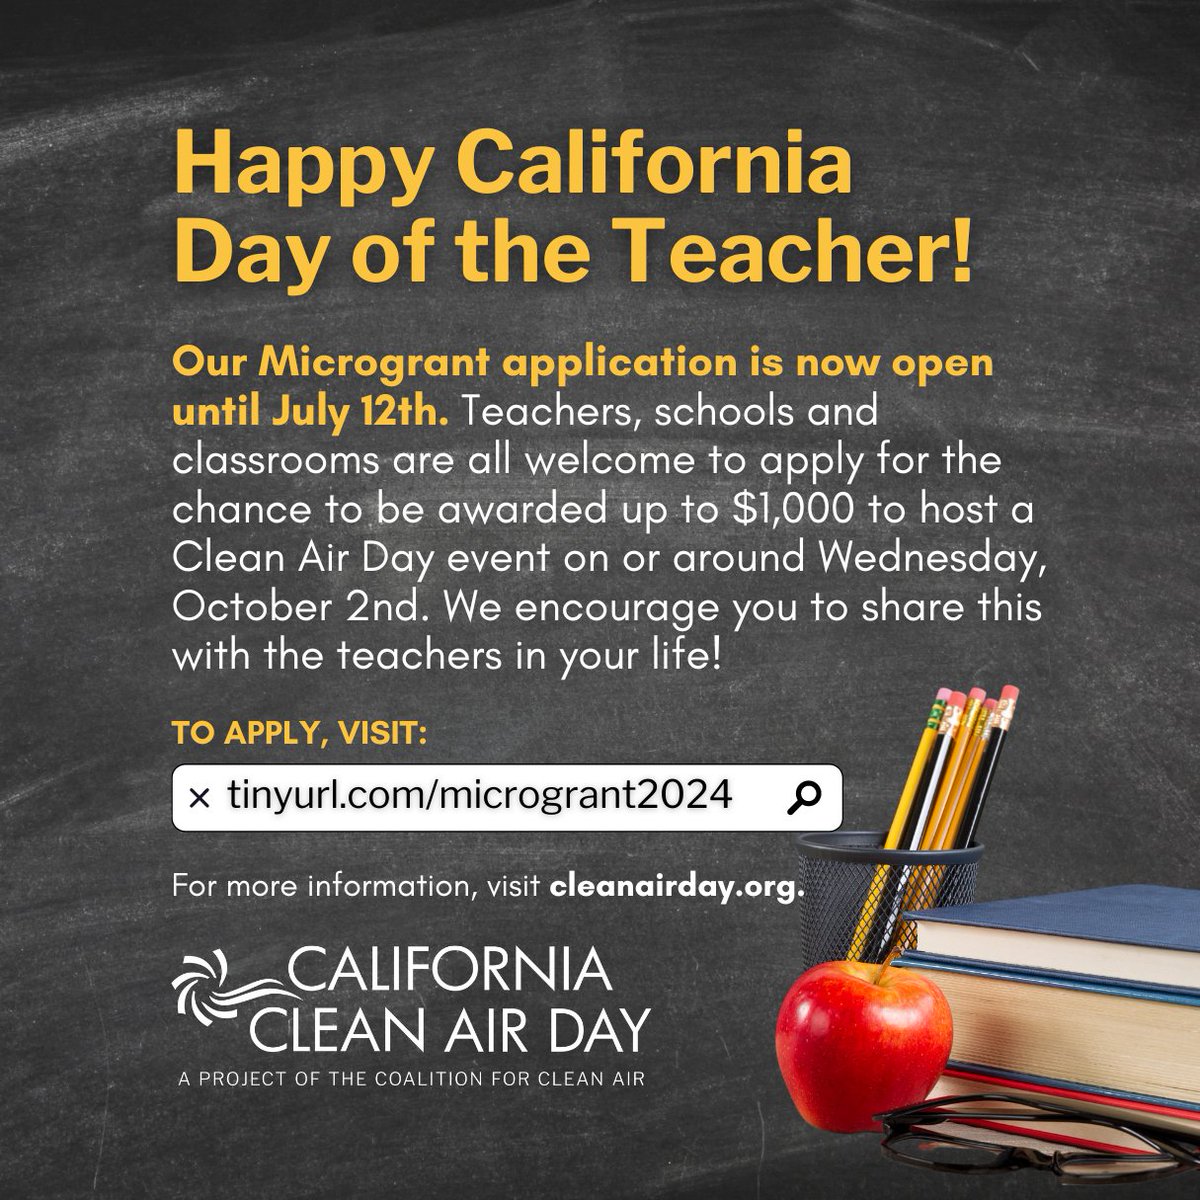 Happy California Day of the Teacher! Your dedication is invaluable, and we celebrate you!🍎🏫🩵

📣TEACHERS: We invite you to apply for a Microgrant this year to help spread clean air awareness events in schools. To apply, visit tinyurl.com/microgrant2024